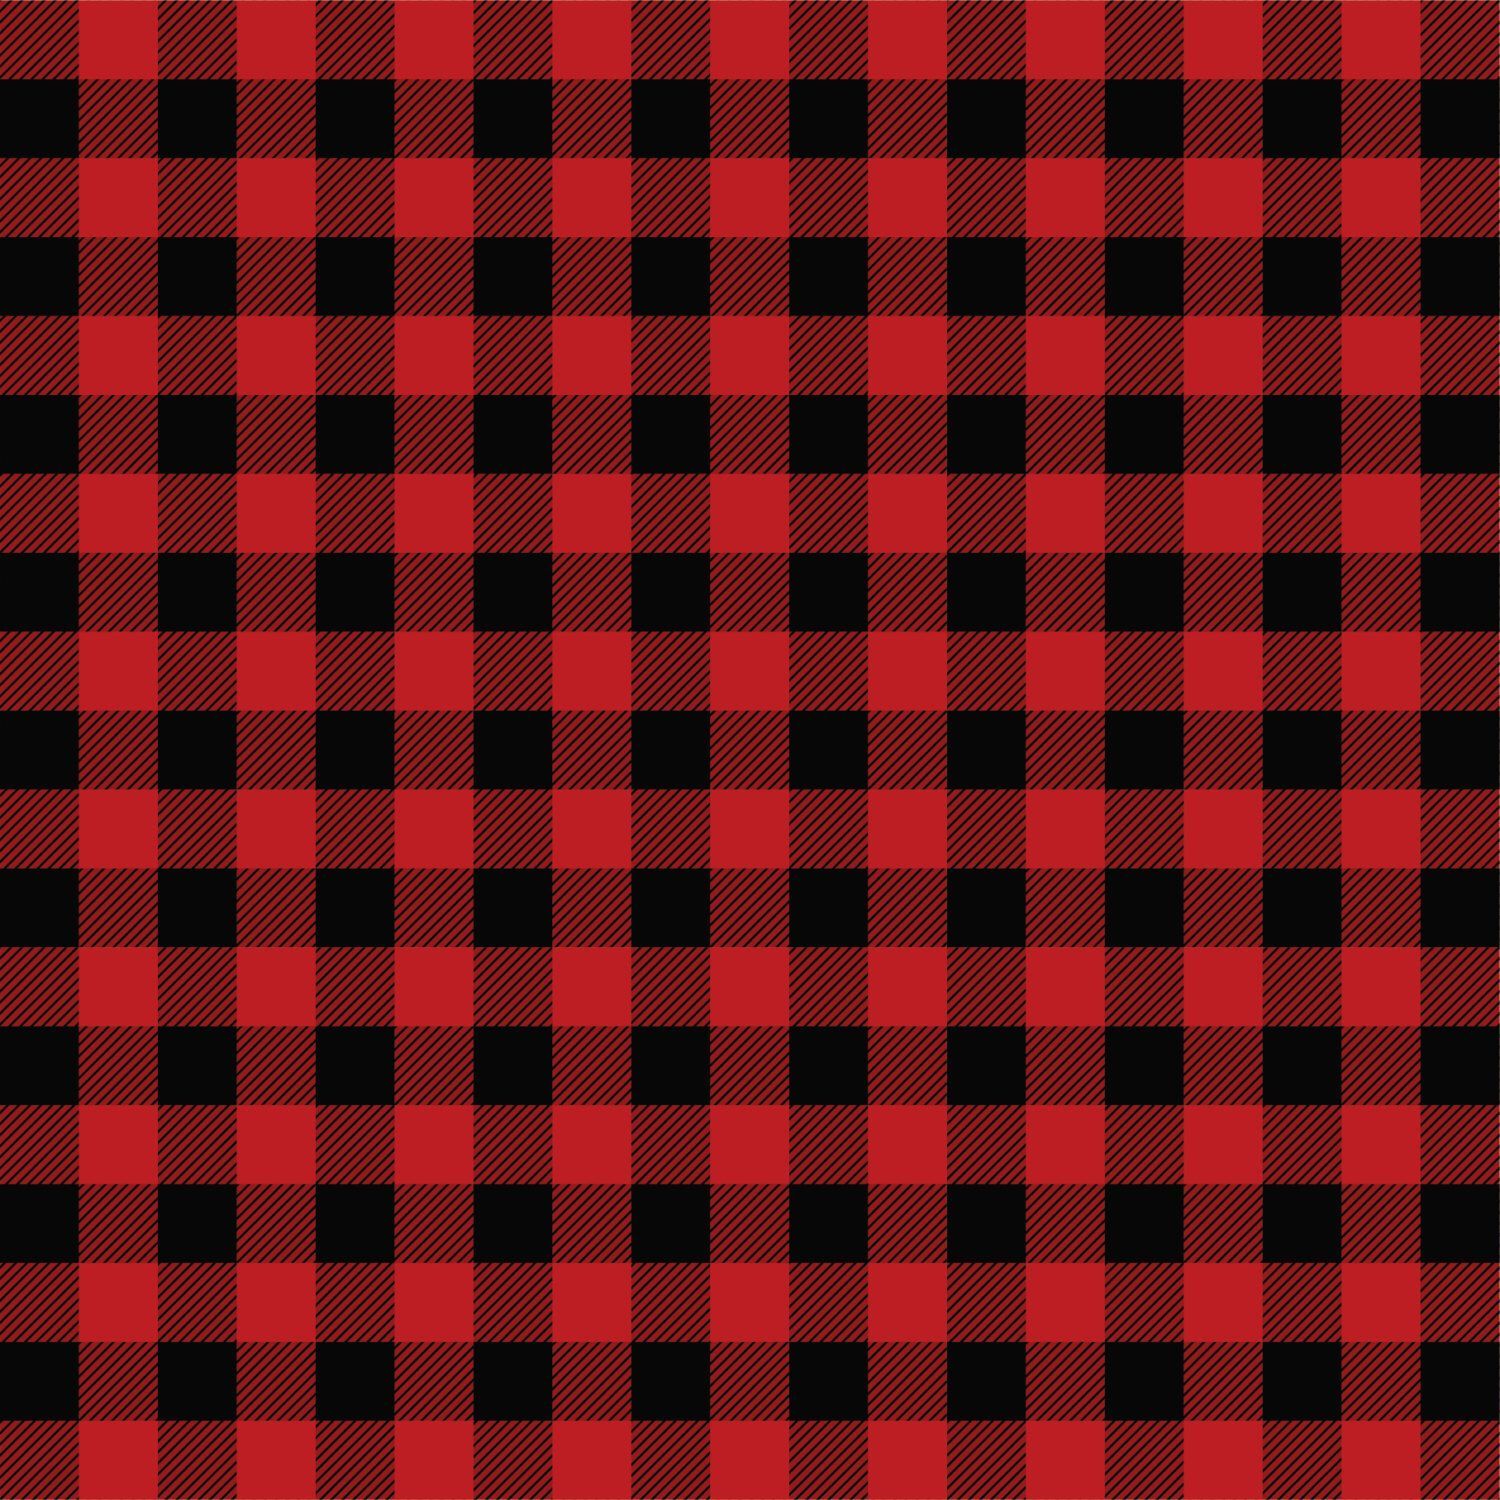 Red Plaid PNG Picture Christmas Red And Black Plaid Background Christmas  Festival Tartan PNG Image For Free Download  Merry christmas wallpaper  Wallpaper iphone christmas Christmas phone wallpaper